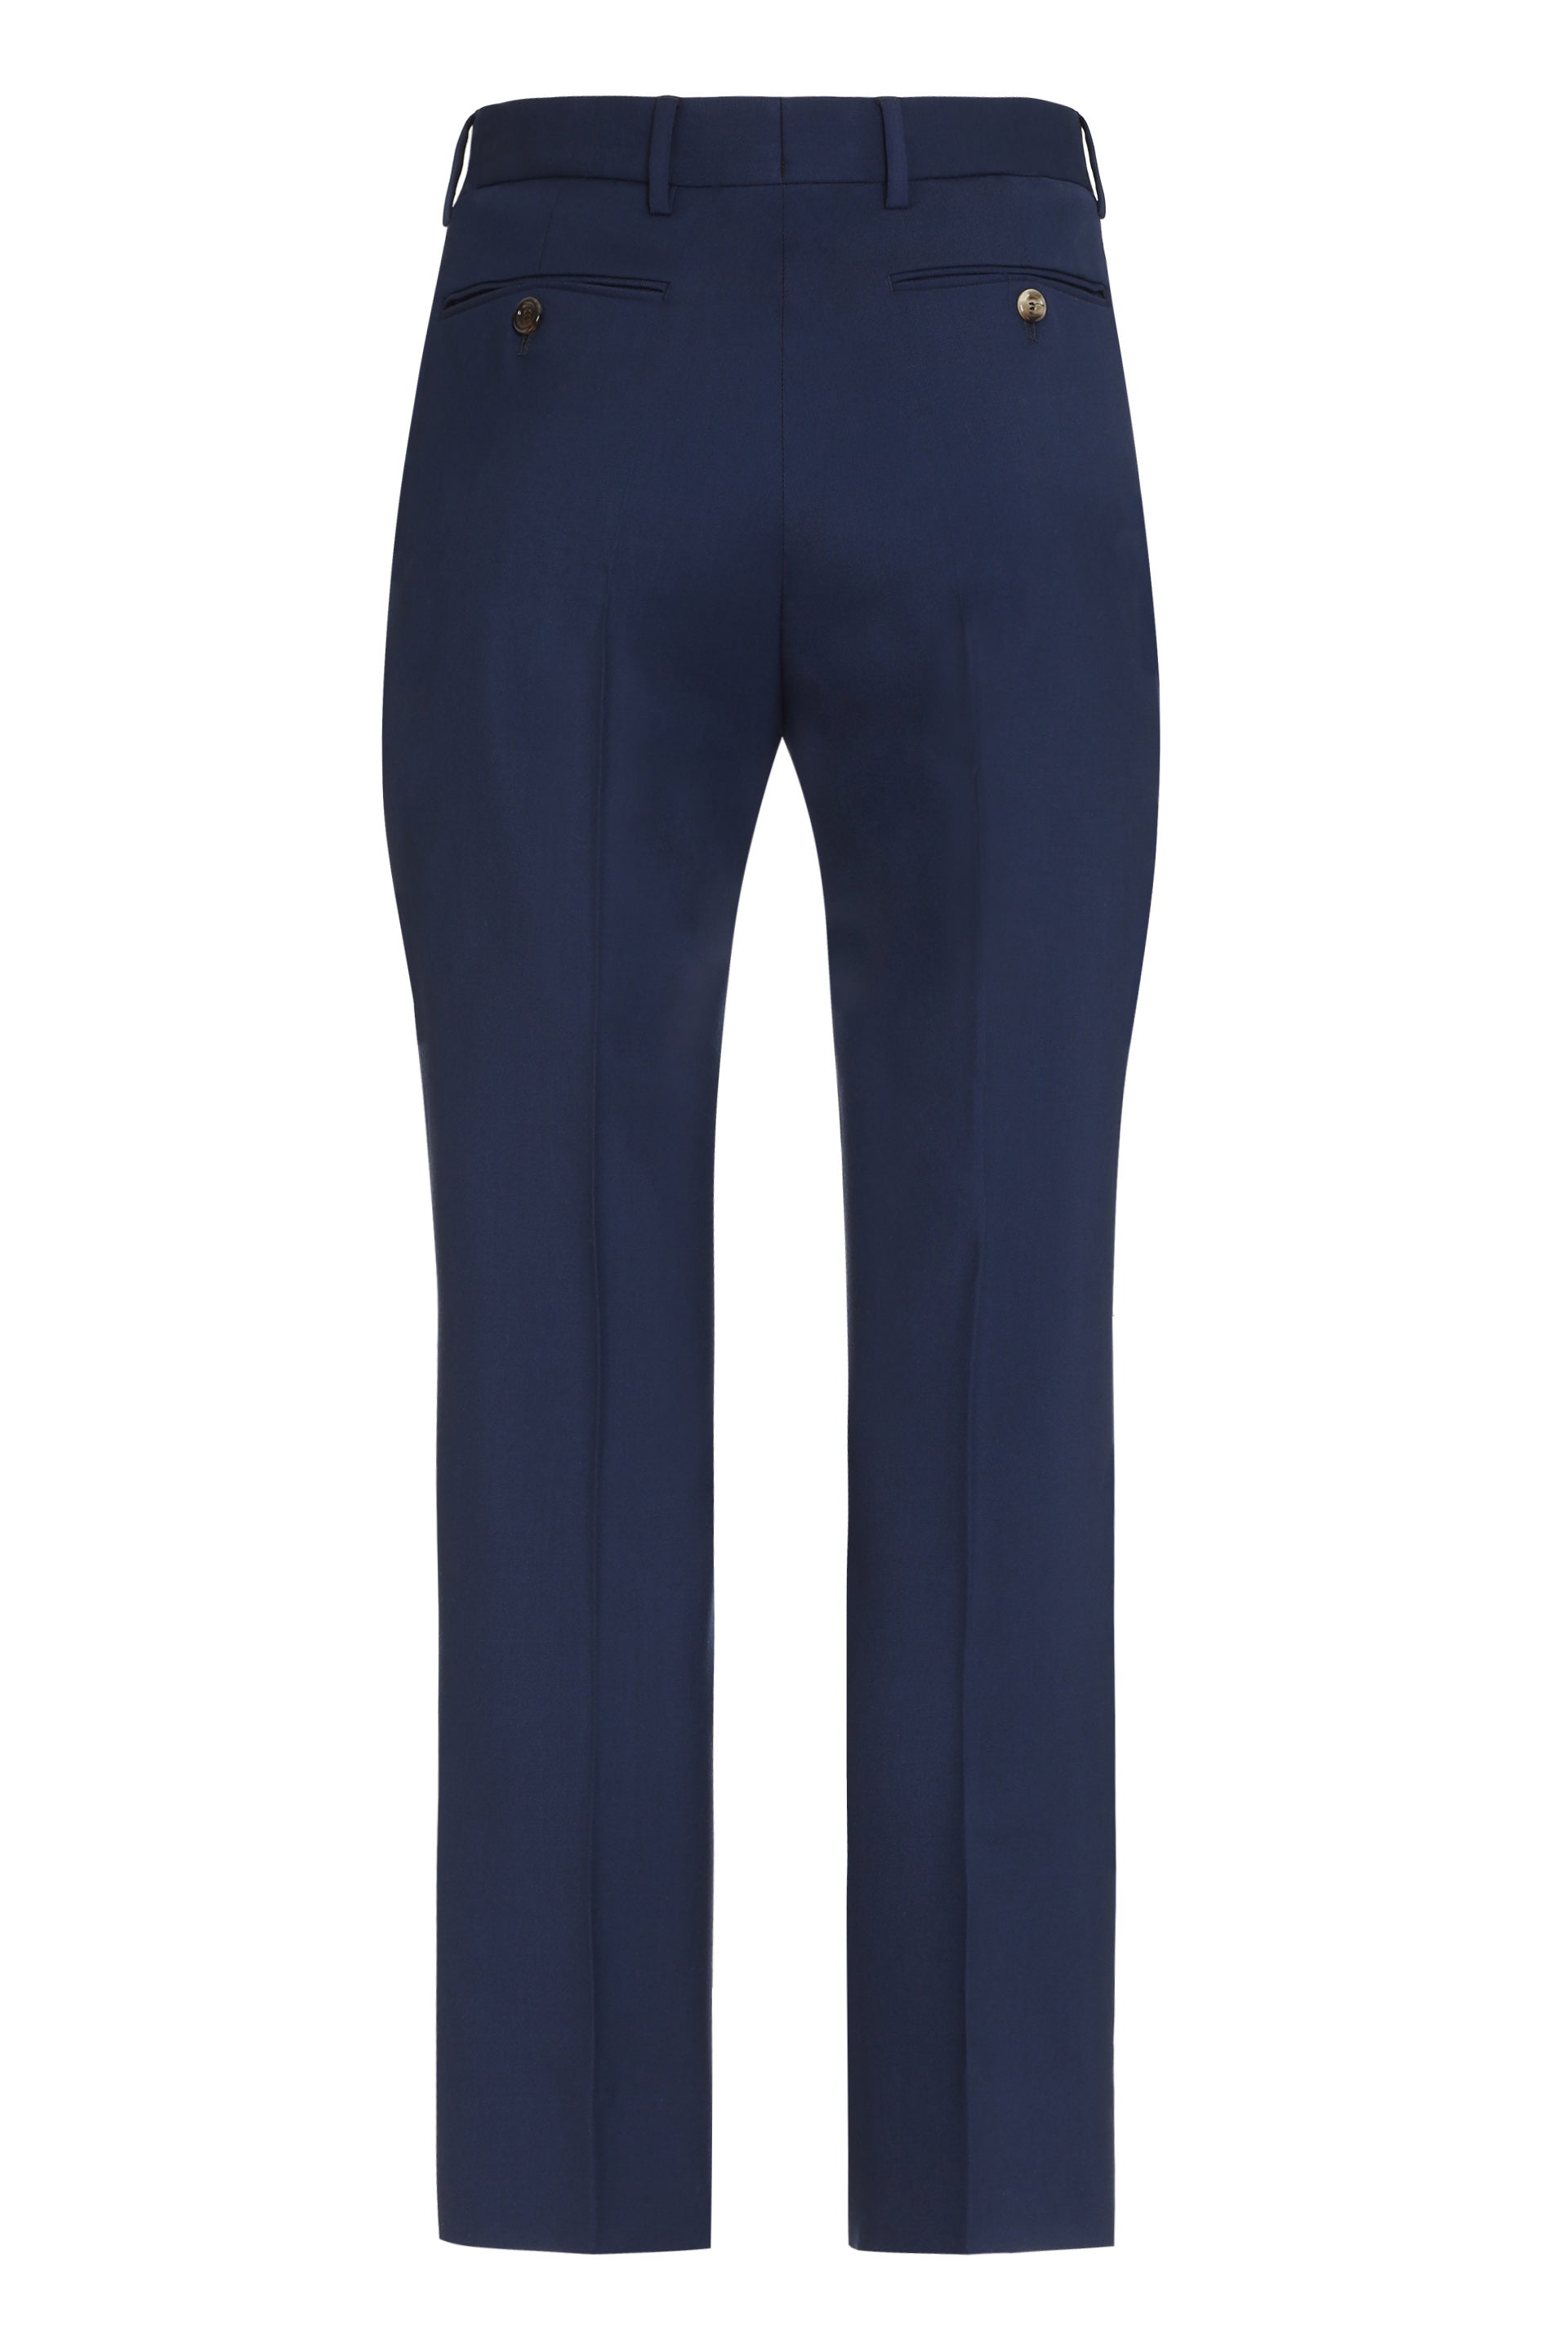 Shop Gucci Men's Blue Wool Blend Trousers With Contrasting Color Side Stripes For Fw22